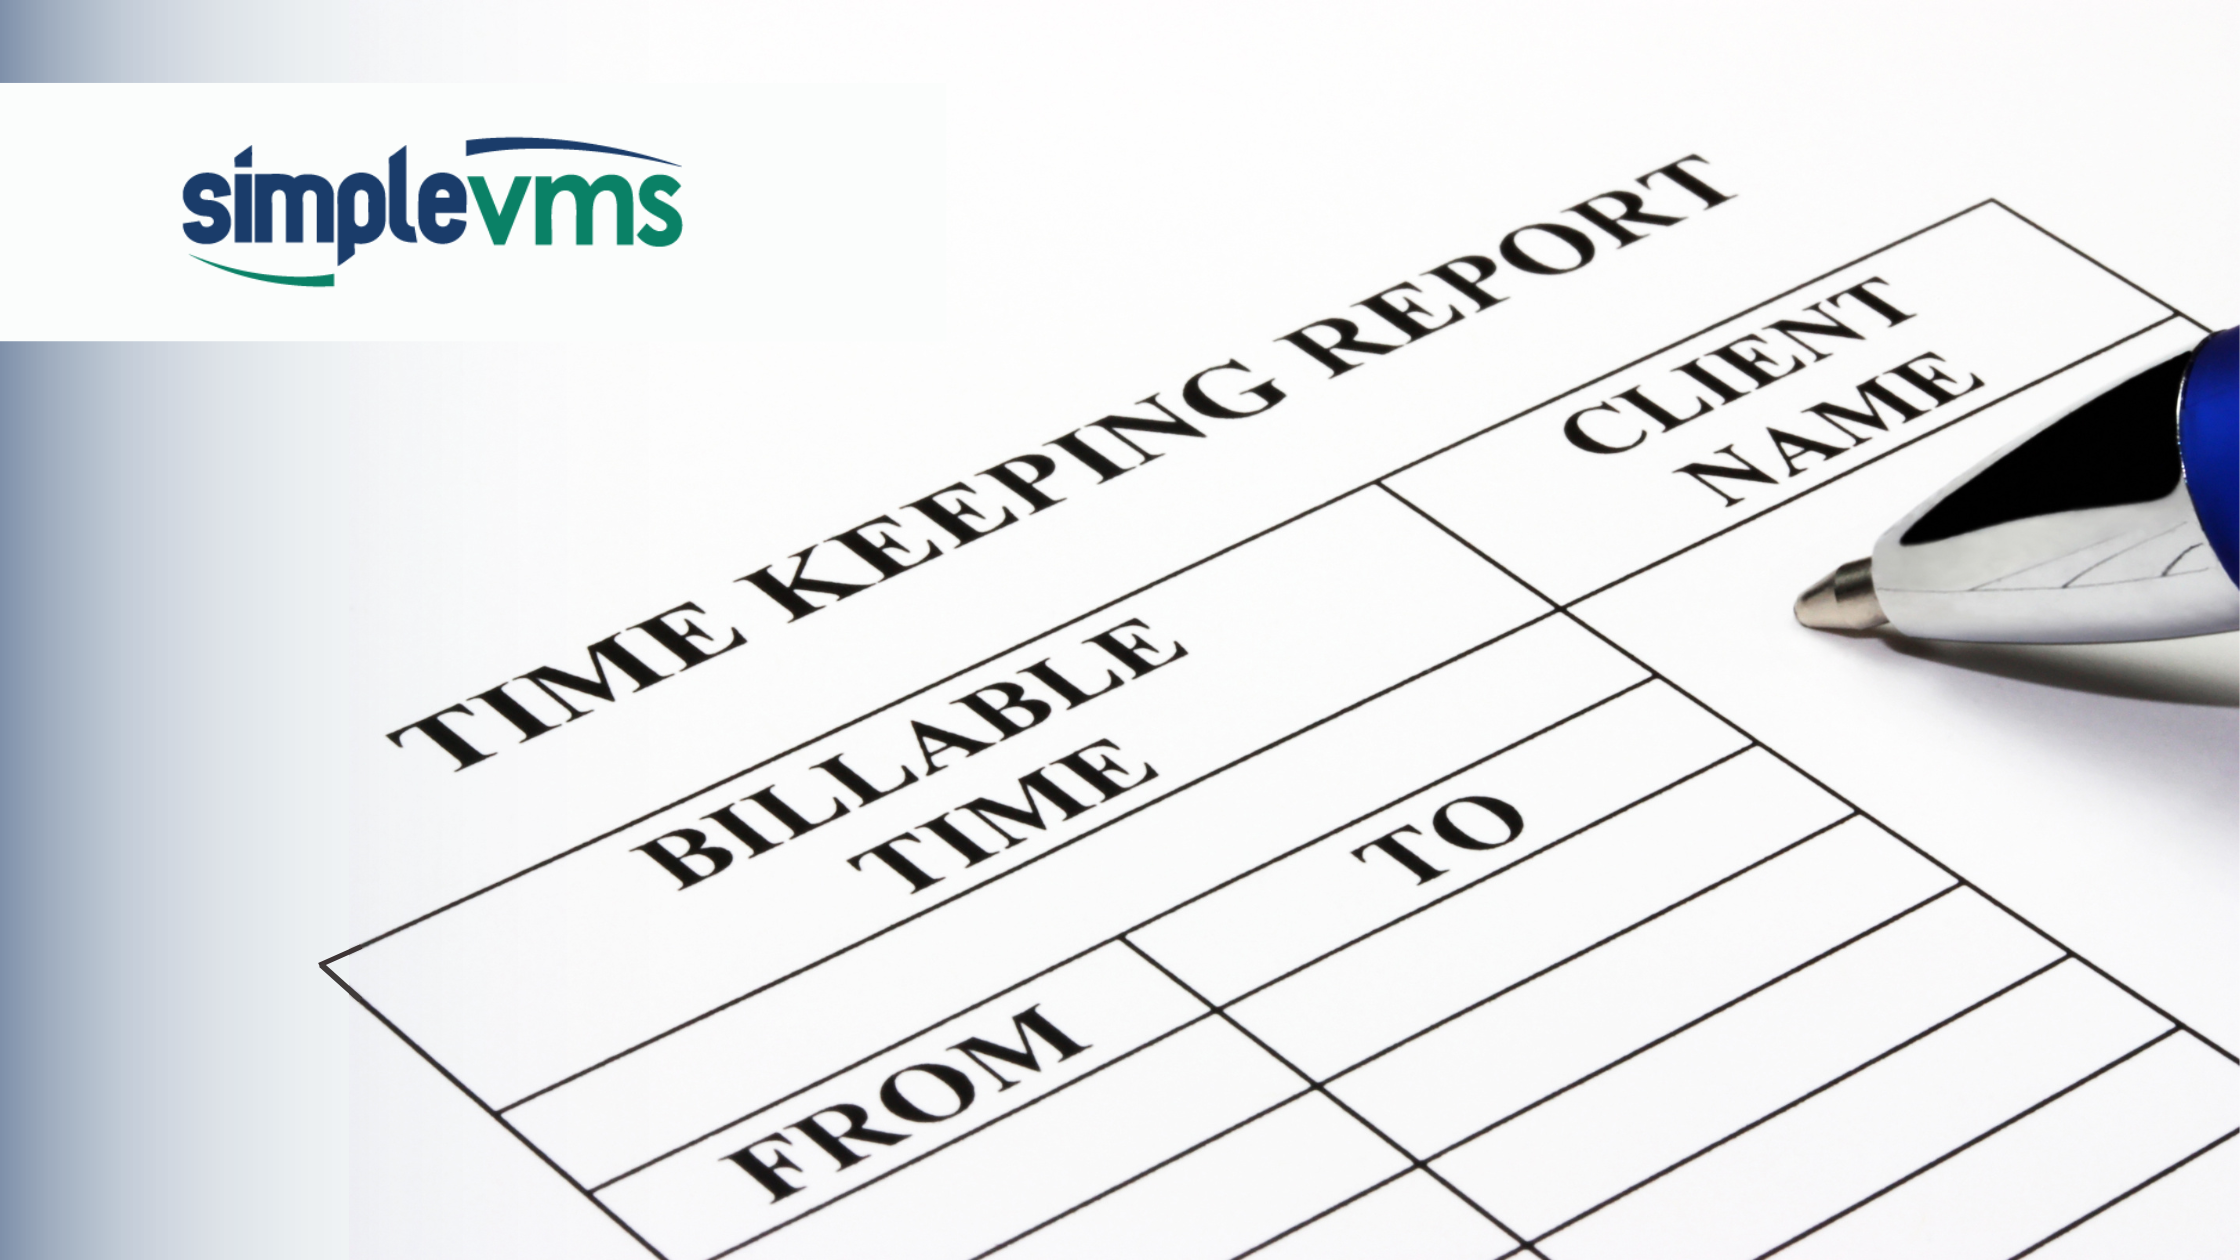 Paper timesheet with SimpleVMS logo